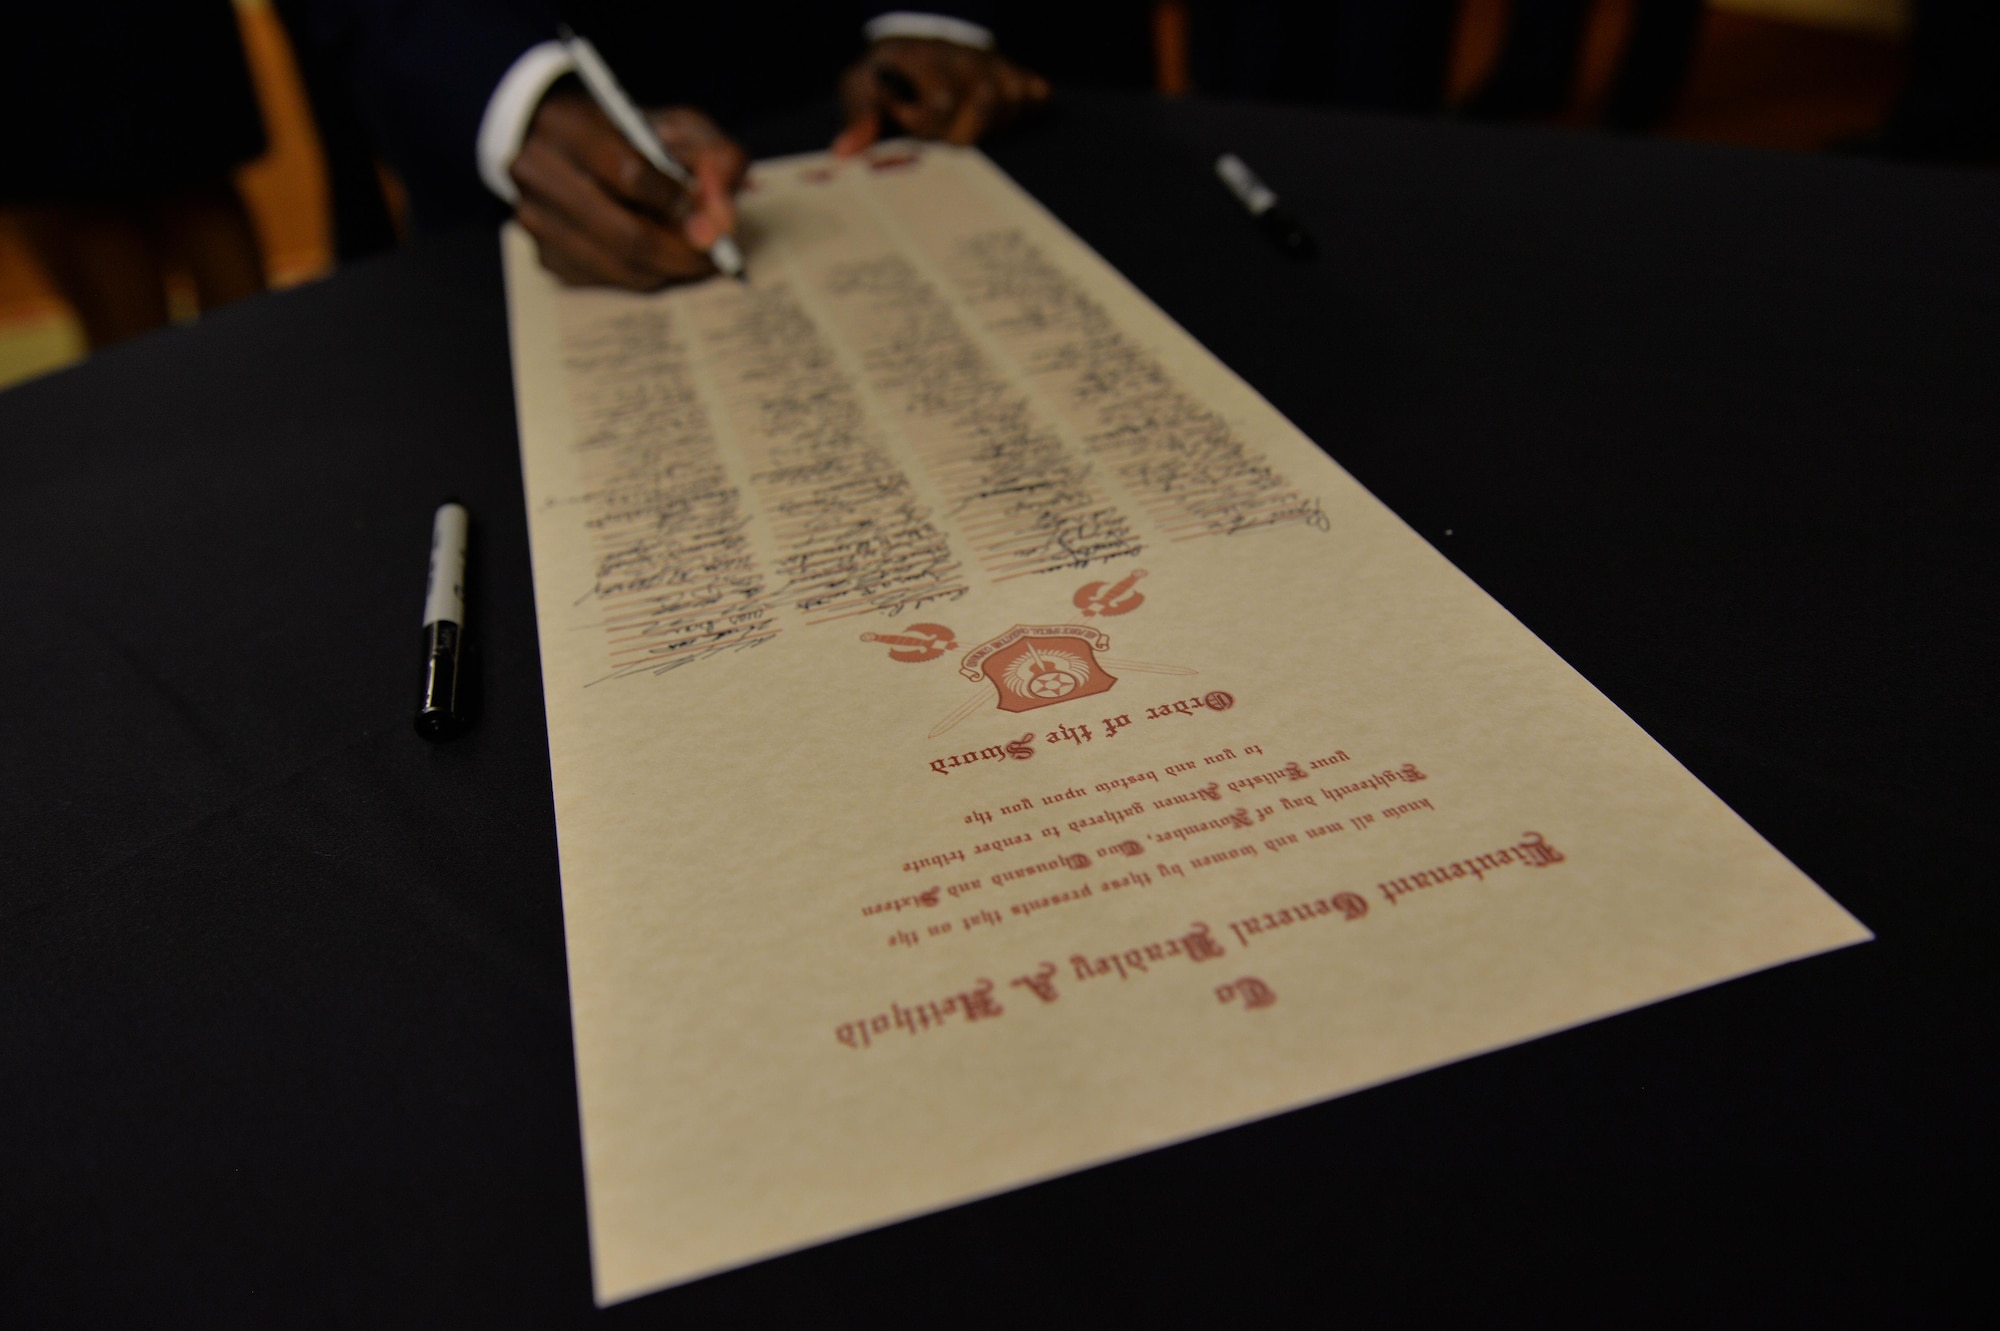 Air Commandos sign the Order of the Sword Proclamation before the ceremony at Hurlburt Field, Fla., Nov. 18, 2016. The ceremony honored Lt. Gen. Brad Heithold, the former commander of Air Force Special Operations Command, for his significant contributions to the enlisted force. (U.S. Air Force photo by Senior Airman Andrea Posey)